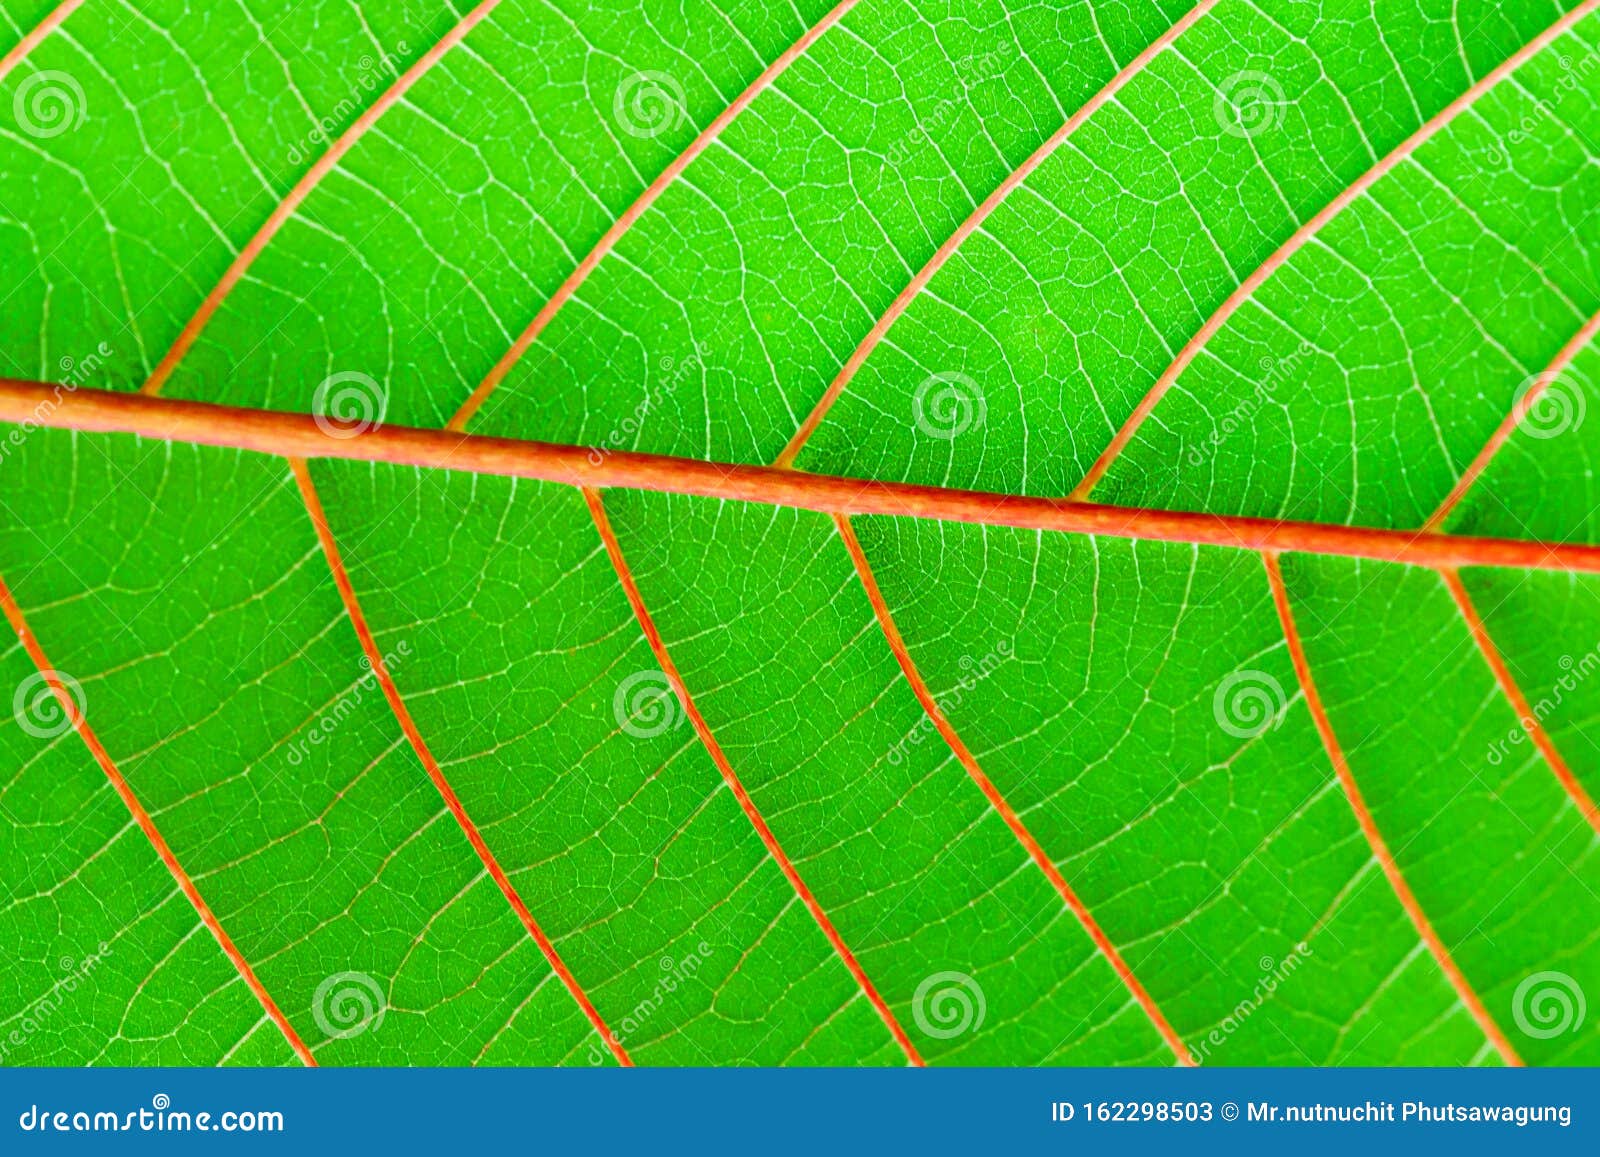 green leaf fresh detailed rugged surface structure extreme macro closeup photo with midrib, leaf veins and grooves as a detailed